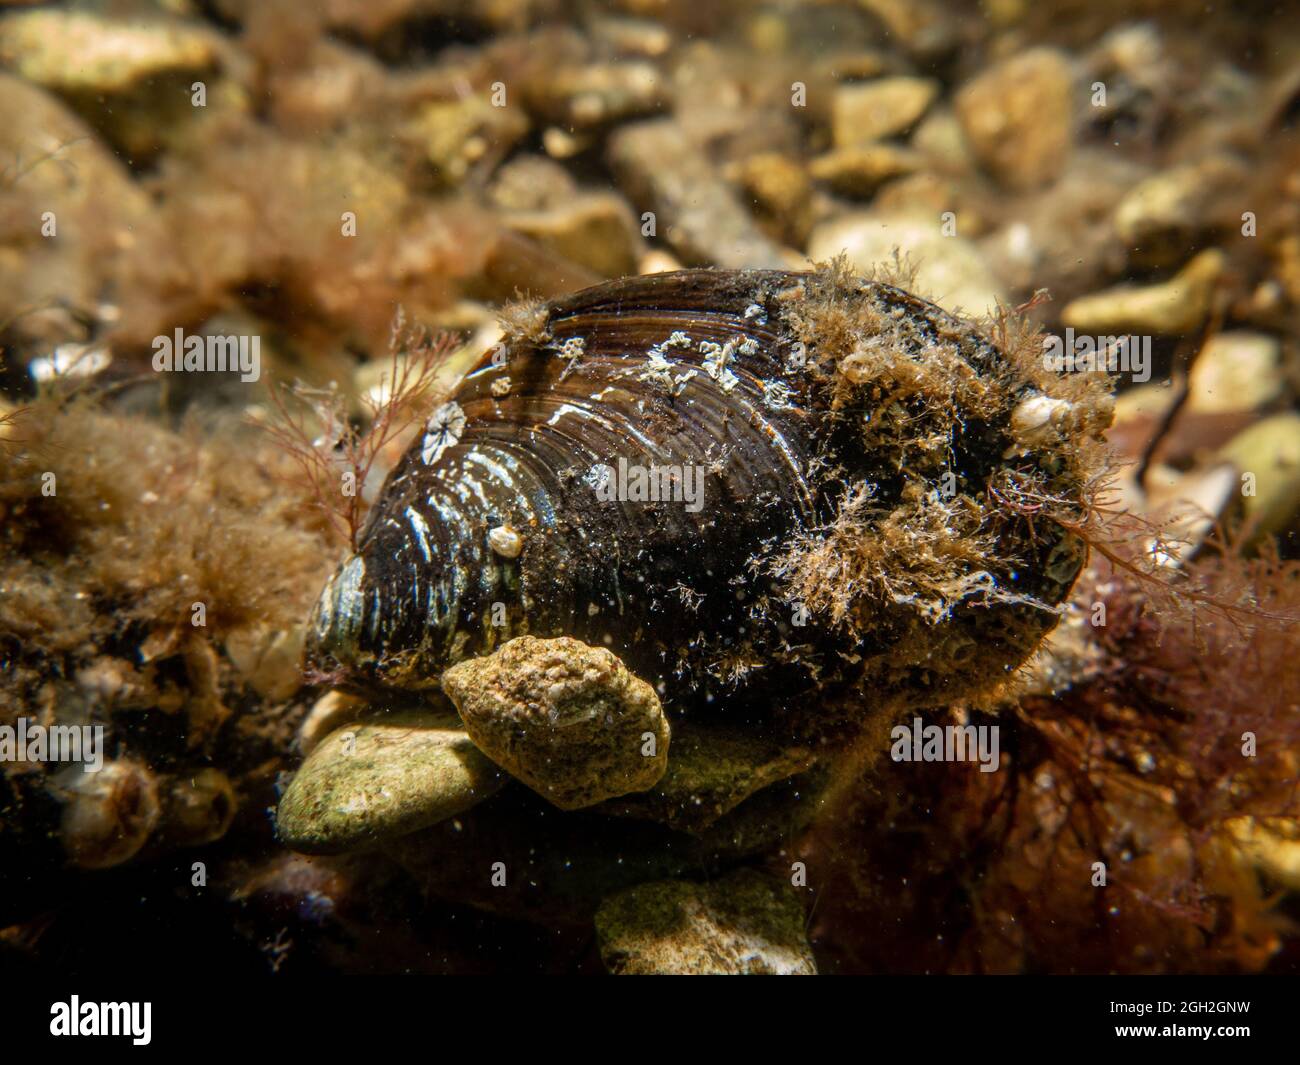 A close-up picture of a blue mussel, Mytilus edulis, in cold Northern European waters Stock Photo